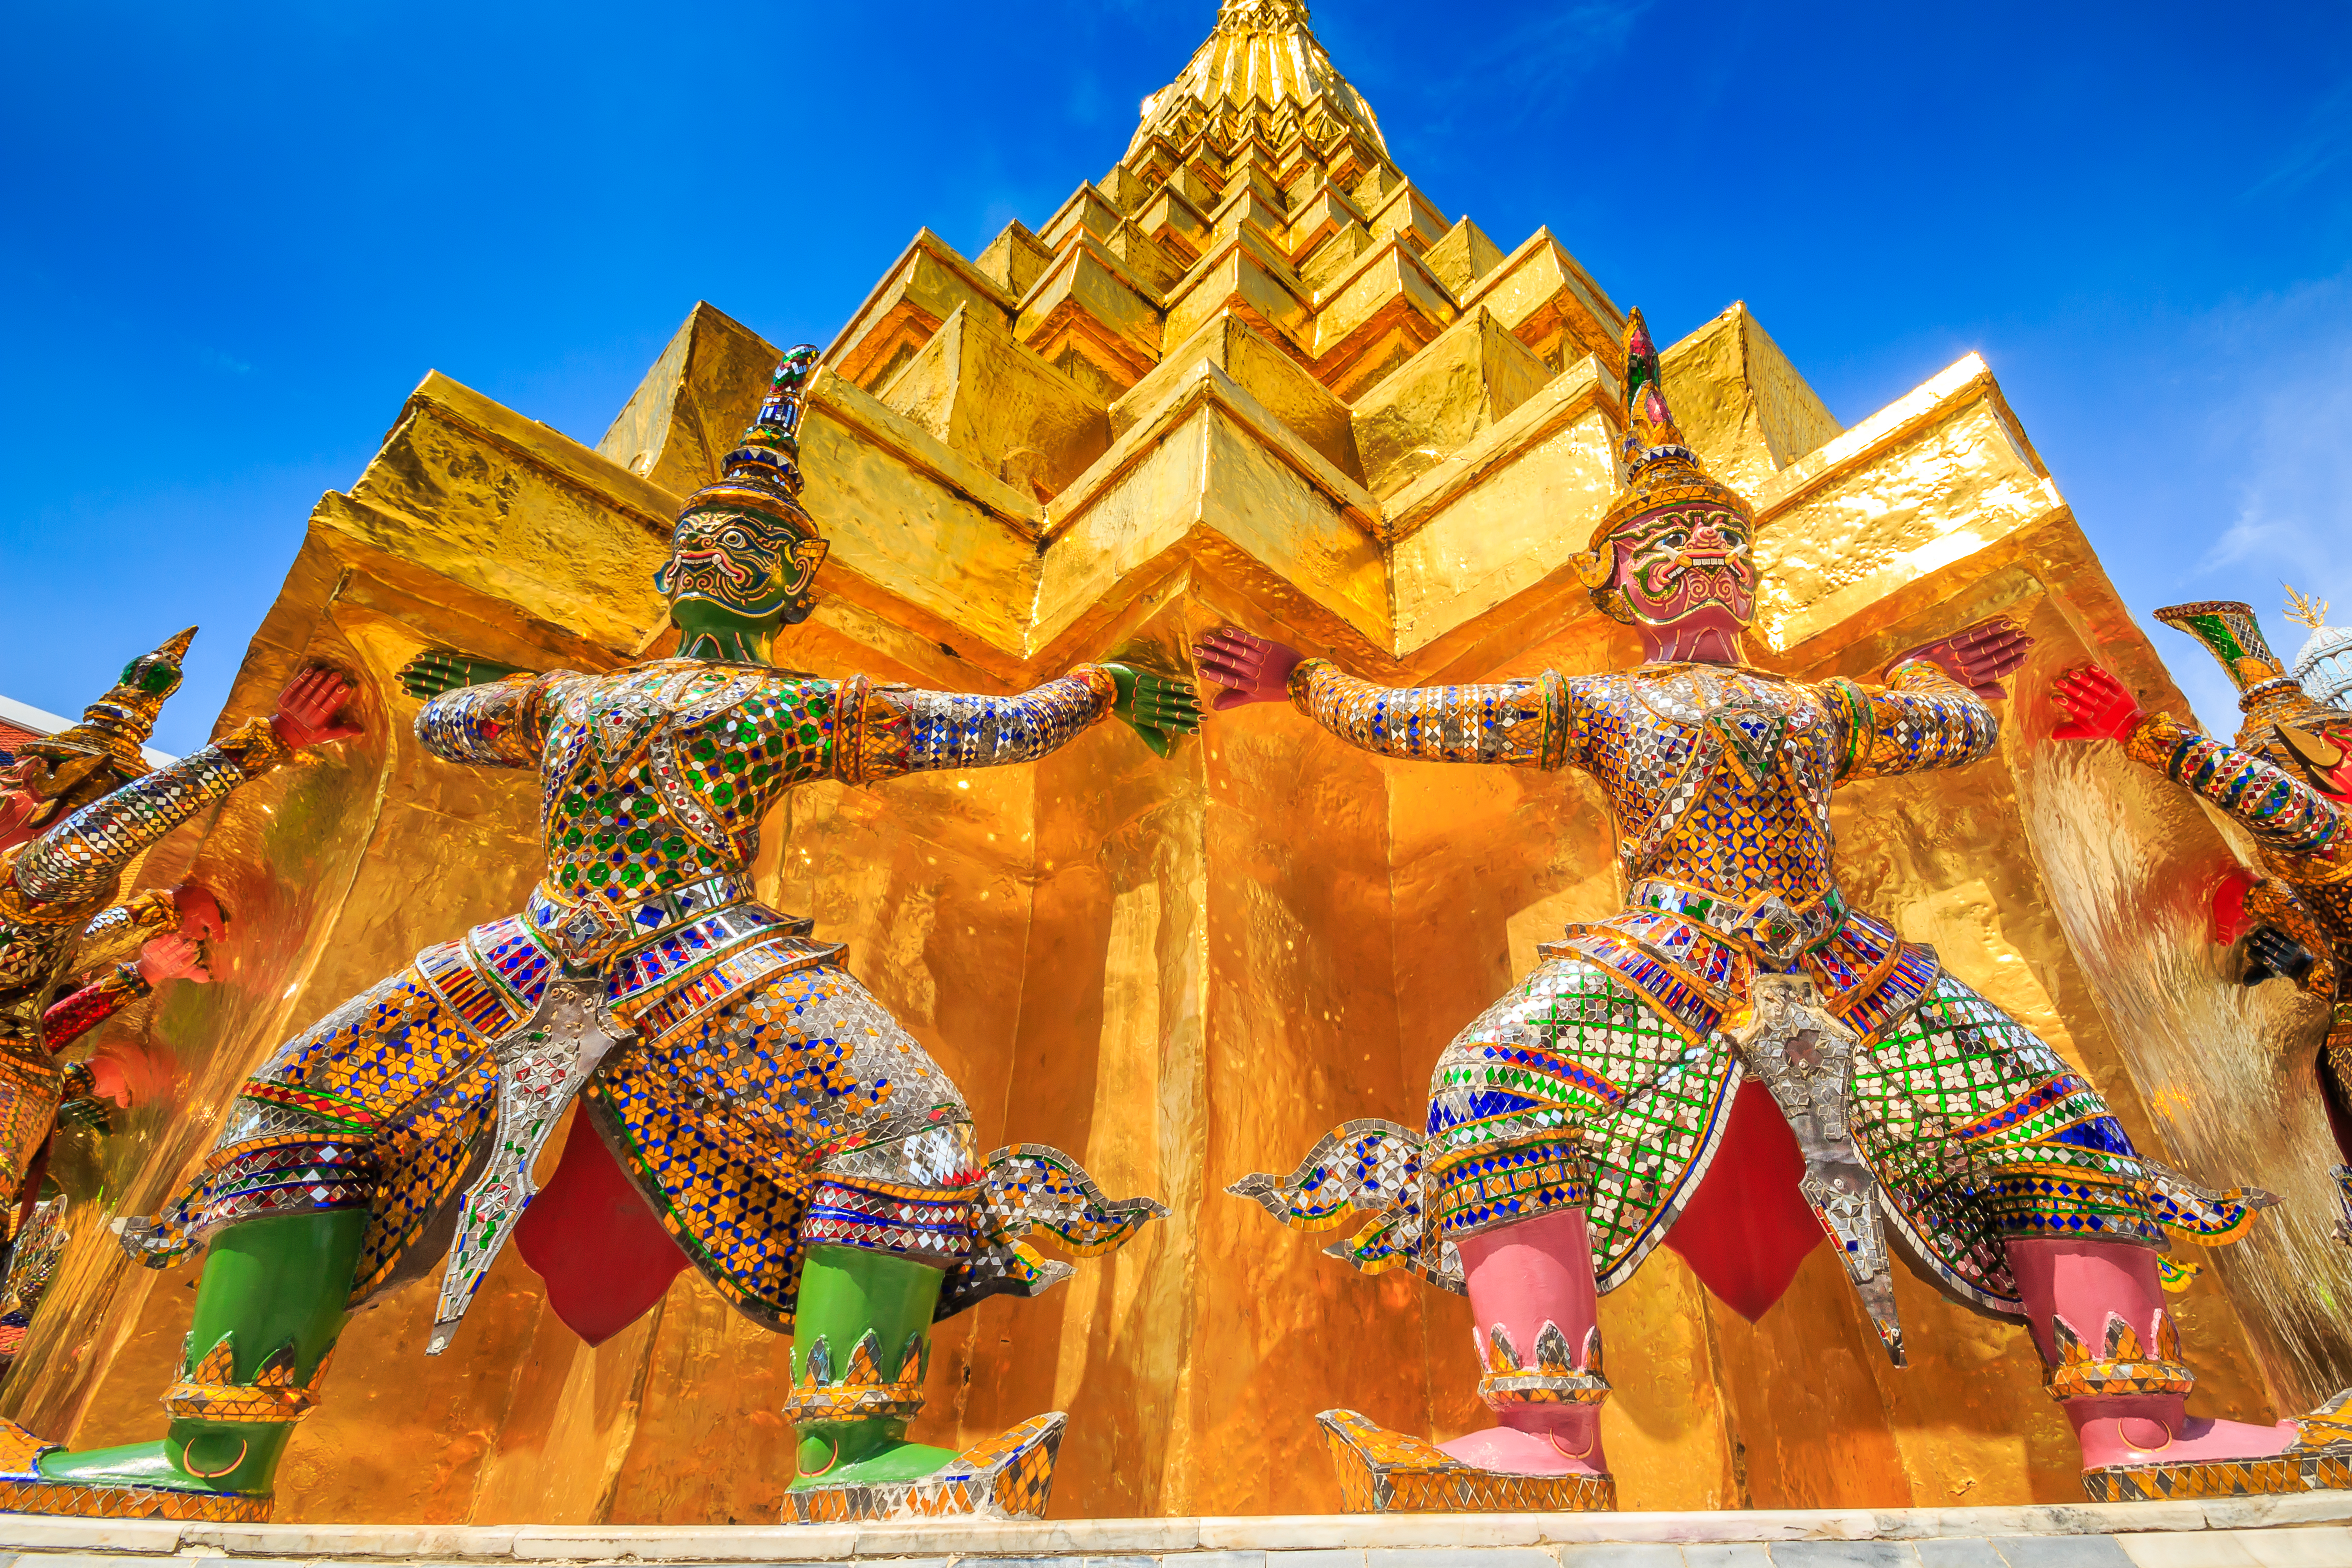 Statues of the yaksha, two brawny guardian giants from the Ramakian epic, greet visitors at Wat Phra Kaew.